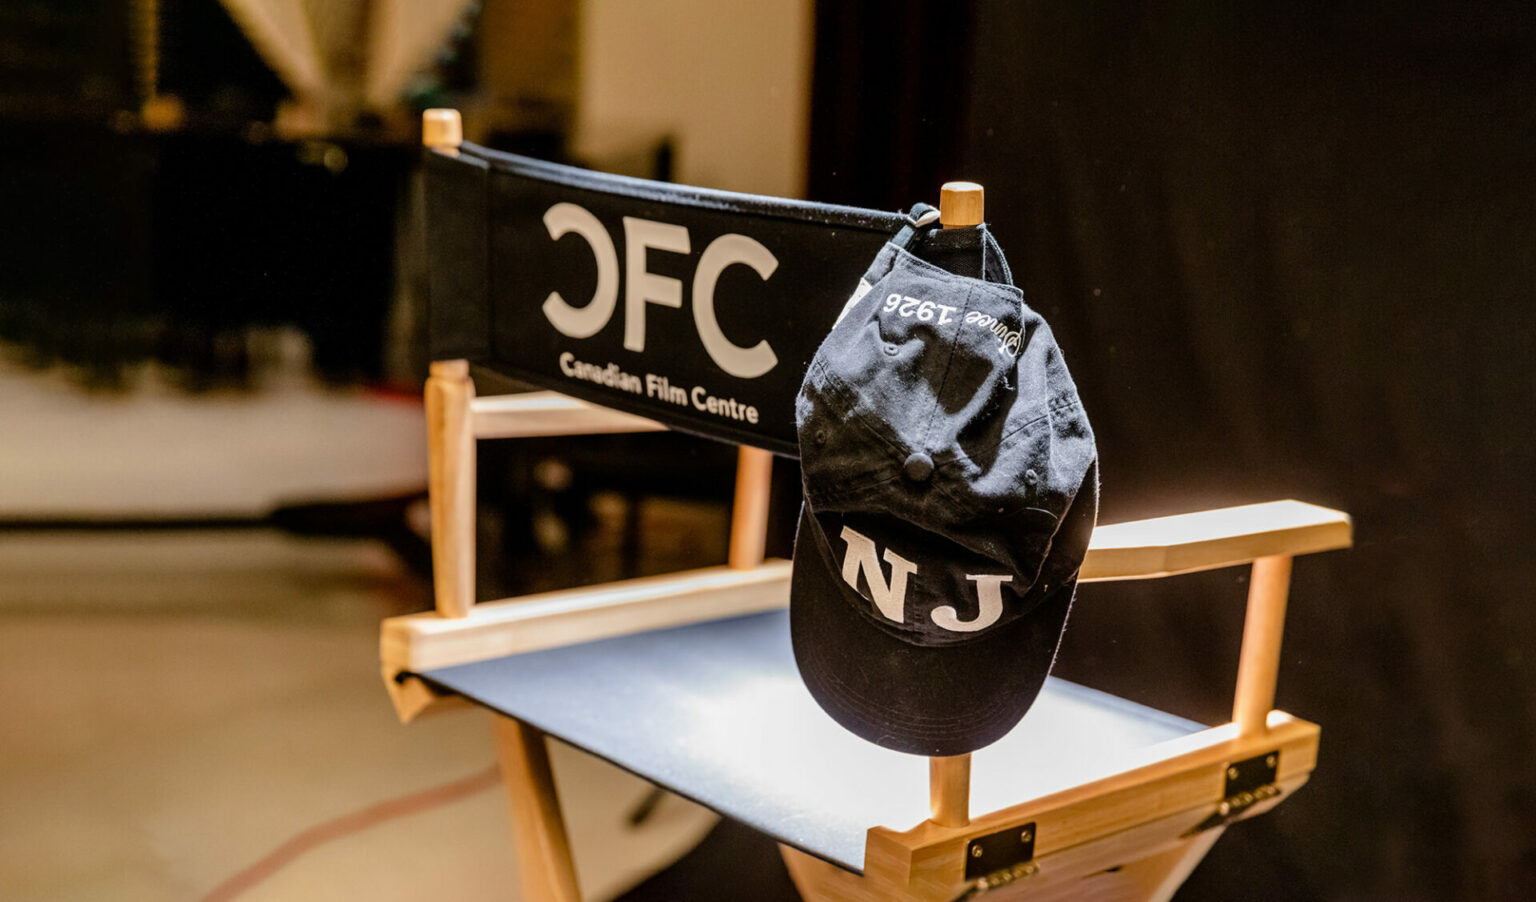 5. Norman Jewison Director's Chair